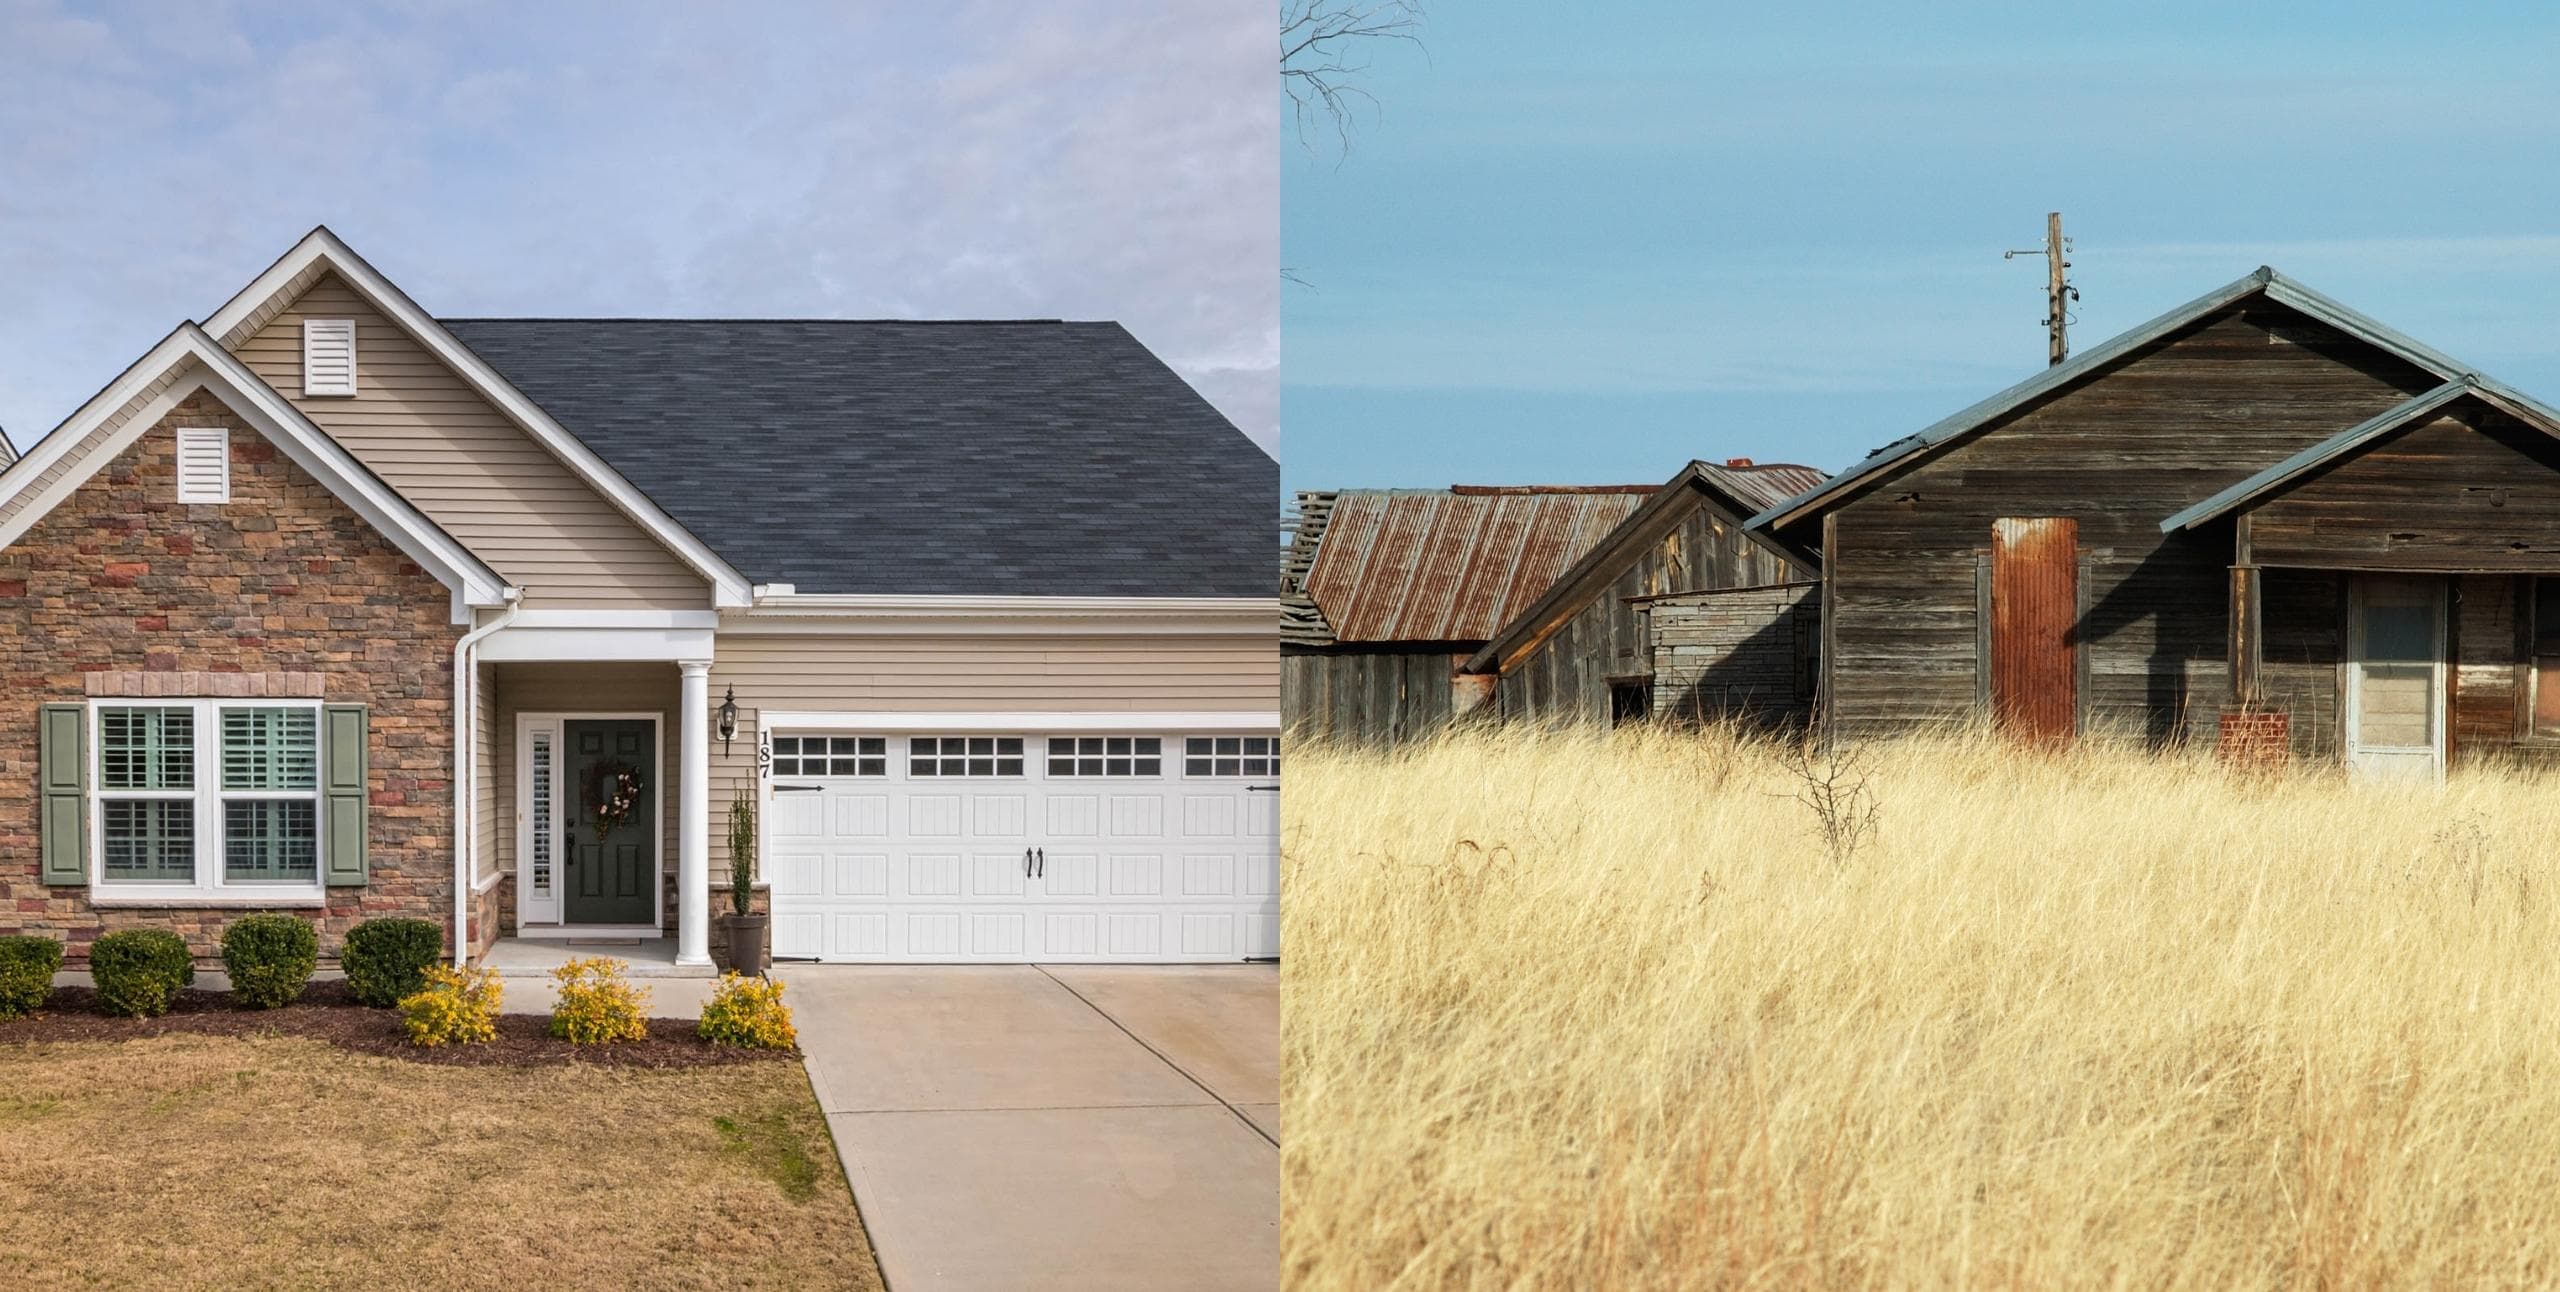 A move-in ready home compared to a fixer upper.